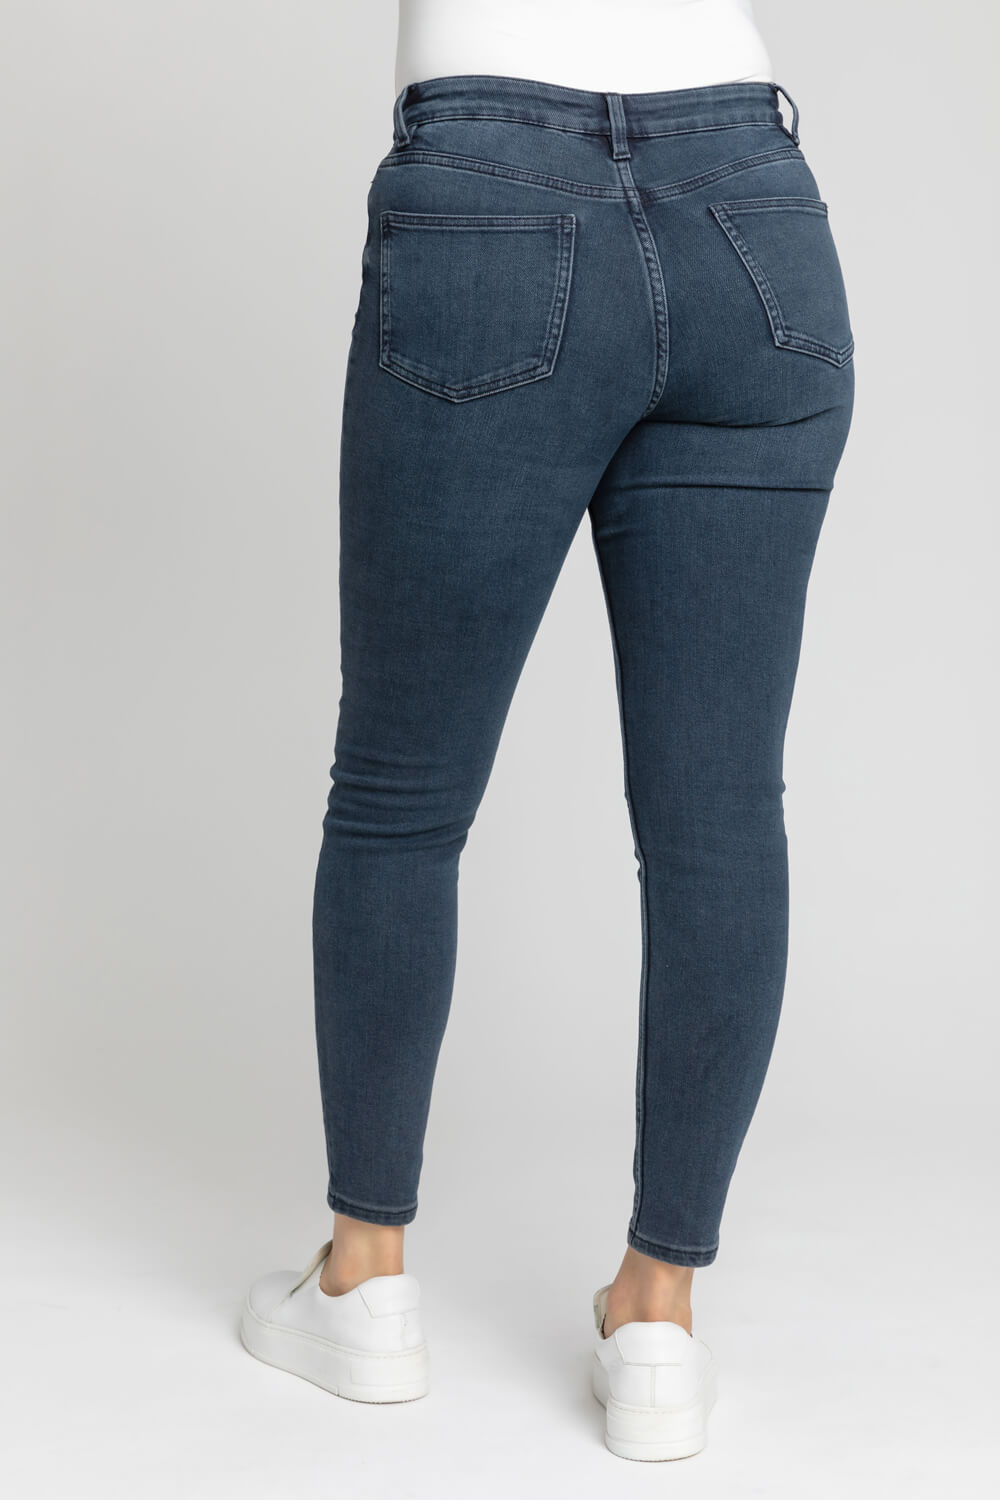 Midnight Blue 29" Stretch Skinny Jeans, Image 3 of 4